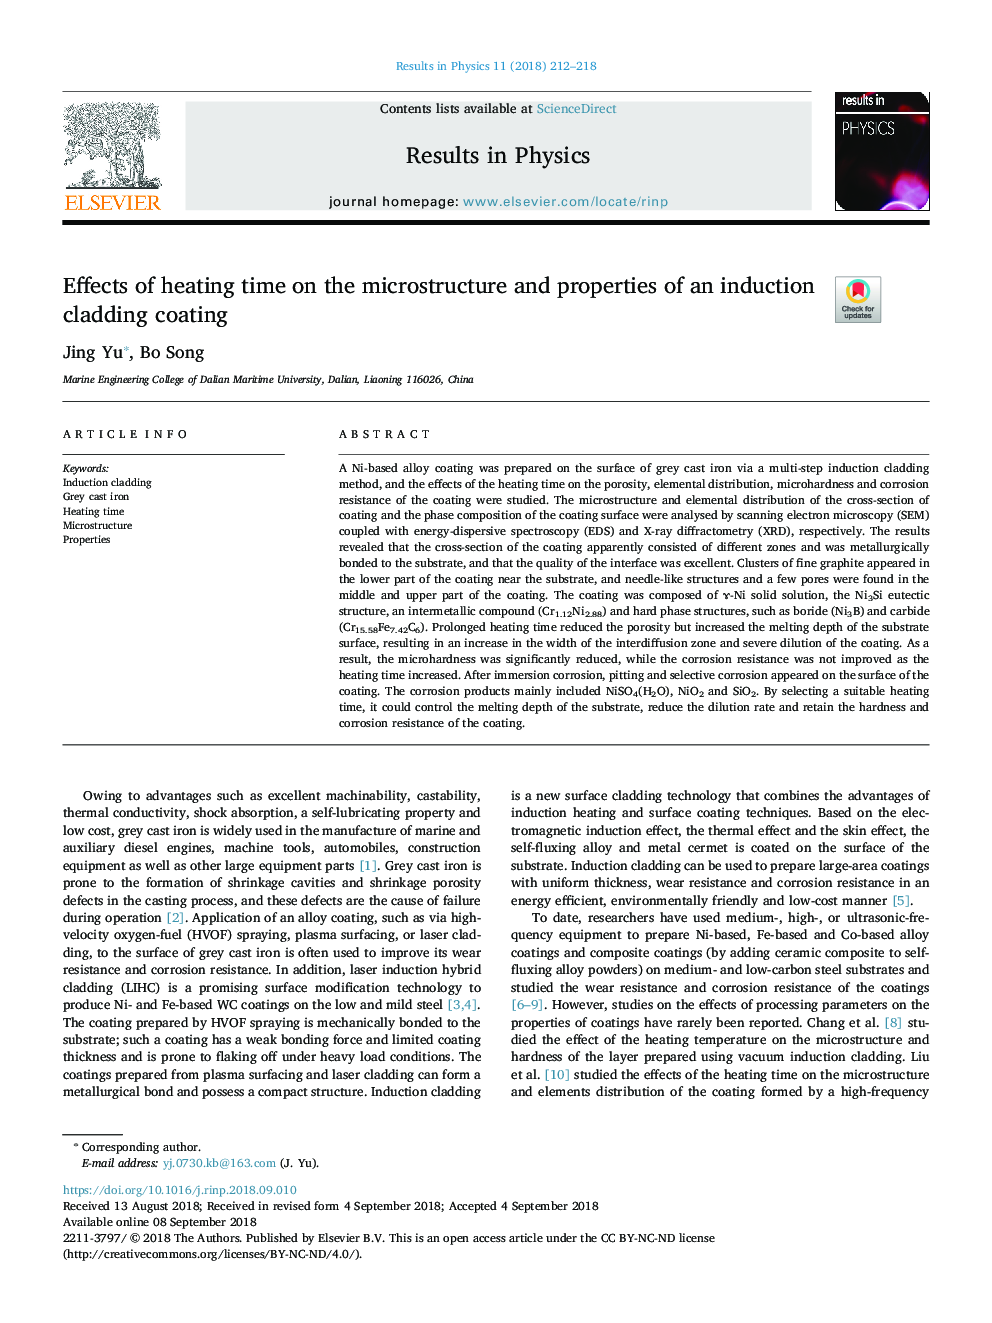 Effects of heating time on the microstructure and properties of an induction cladding coating